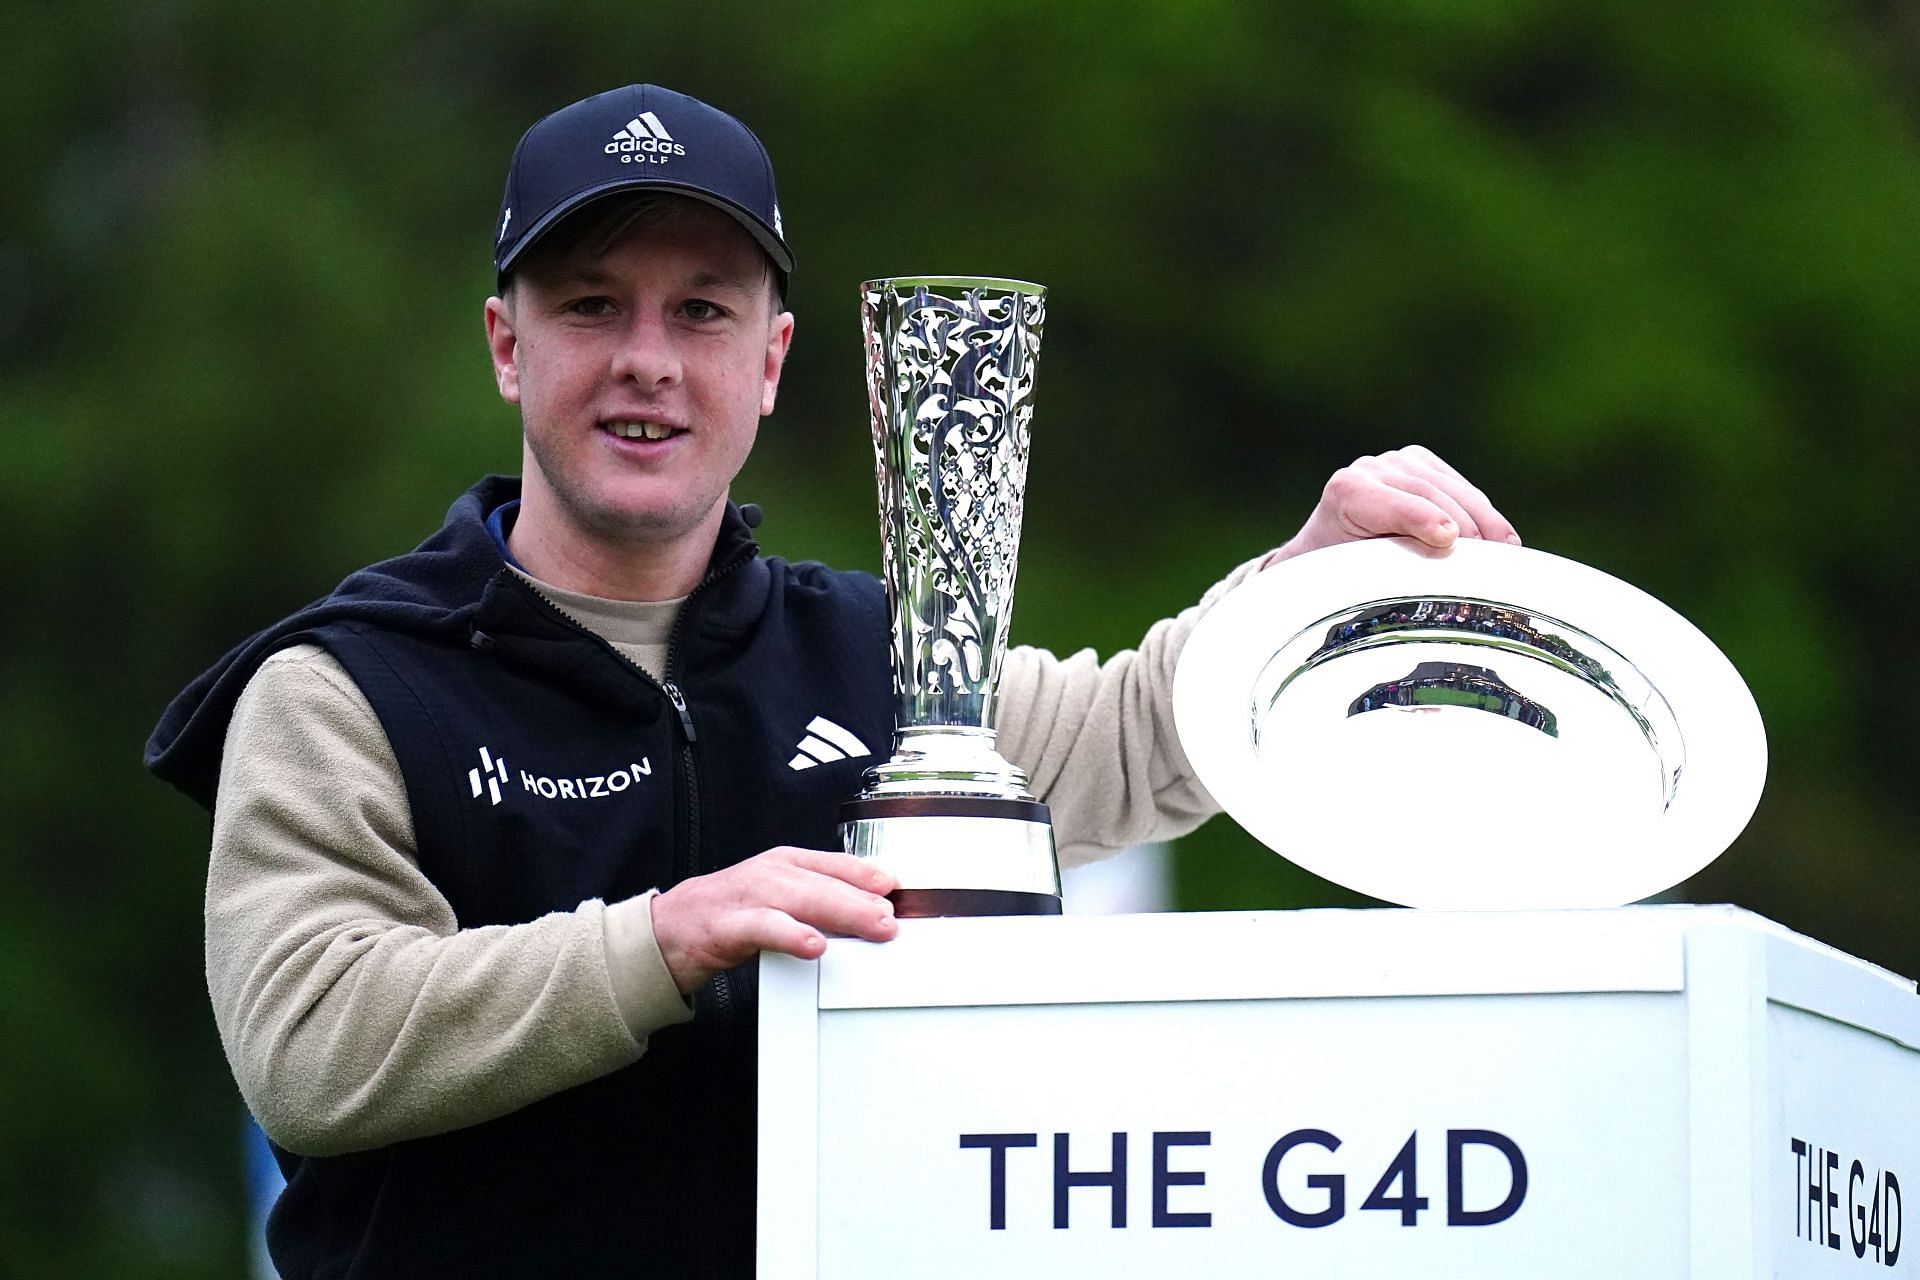 Brendan Lawlor posed with G4D Open trophy (Image via Zac Goodwin/PA) (PA Wire)